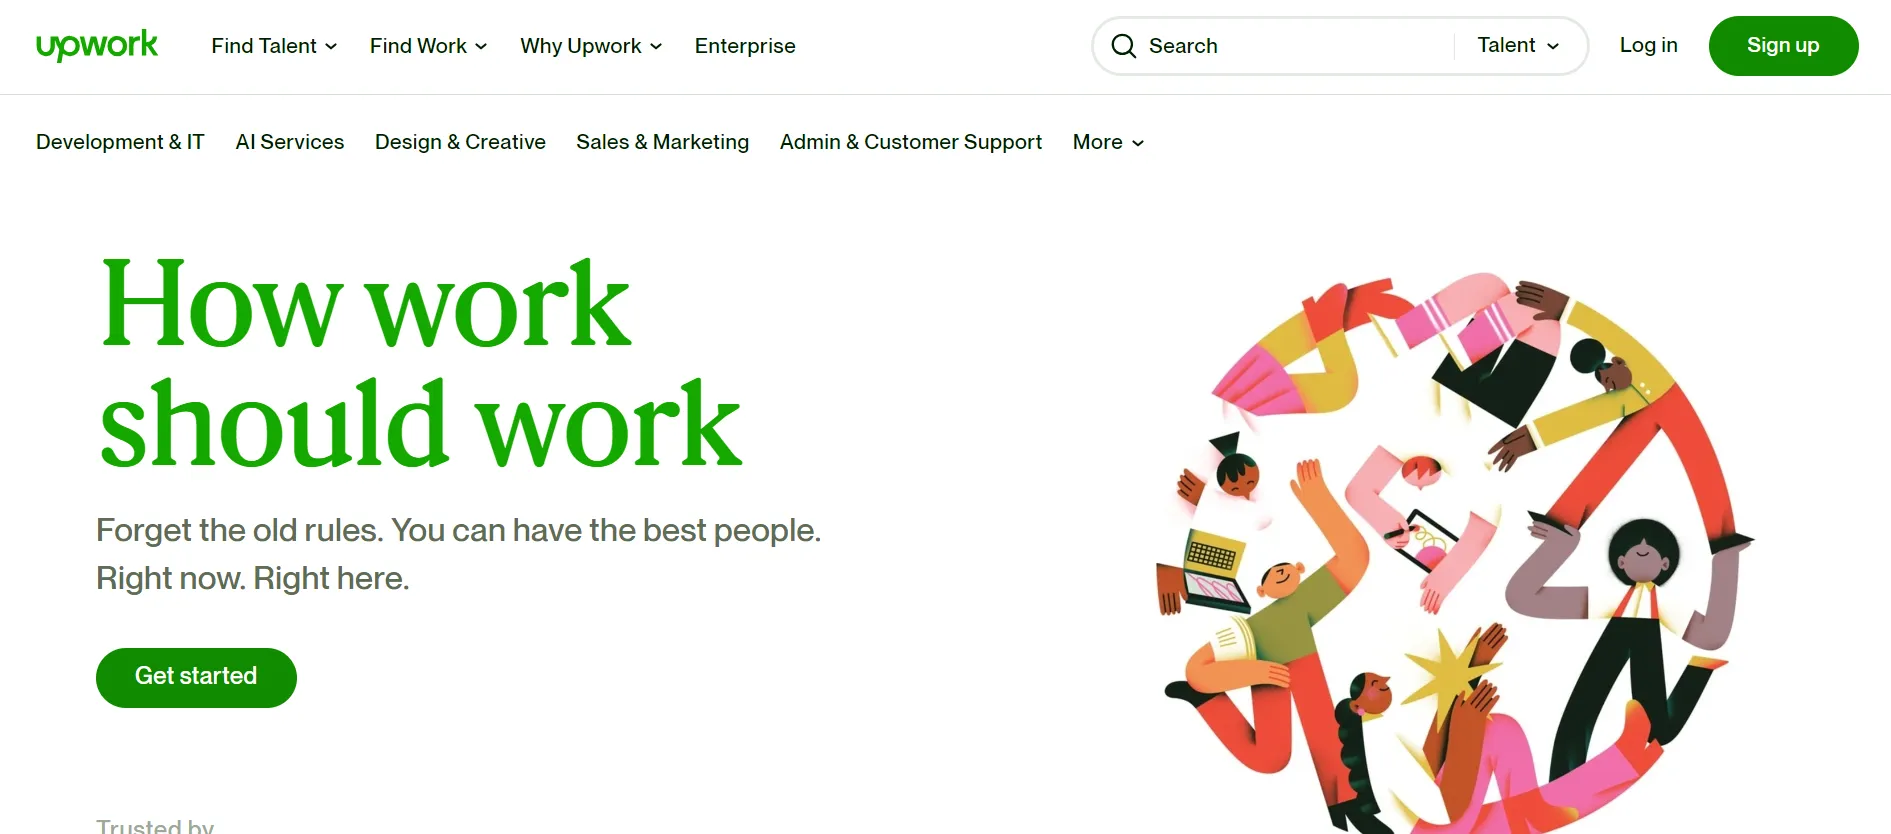 You can find experts at Upwork